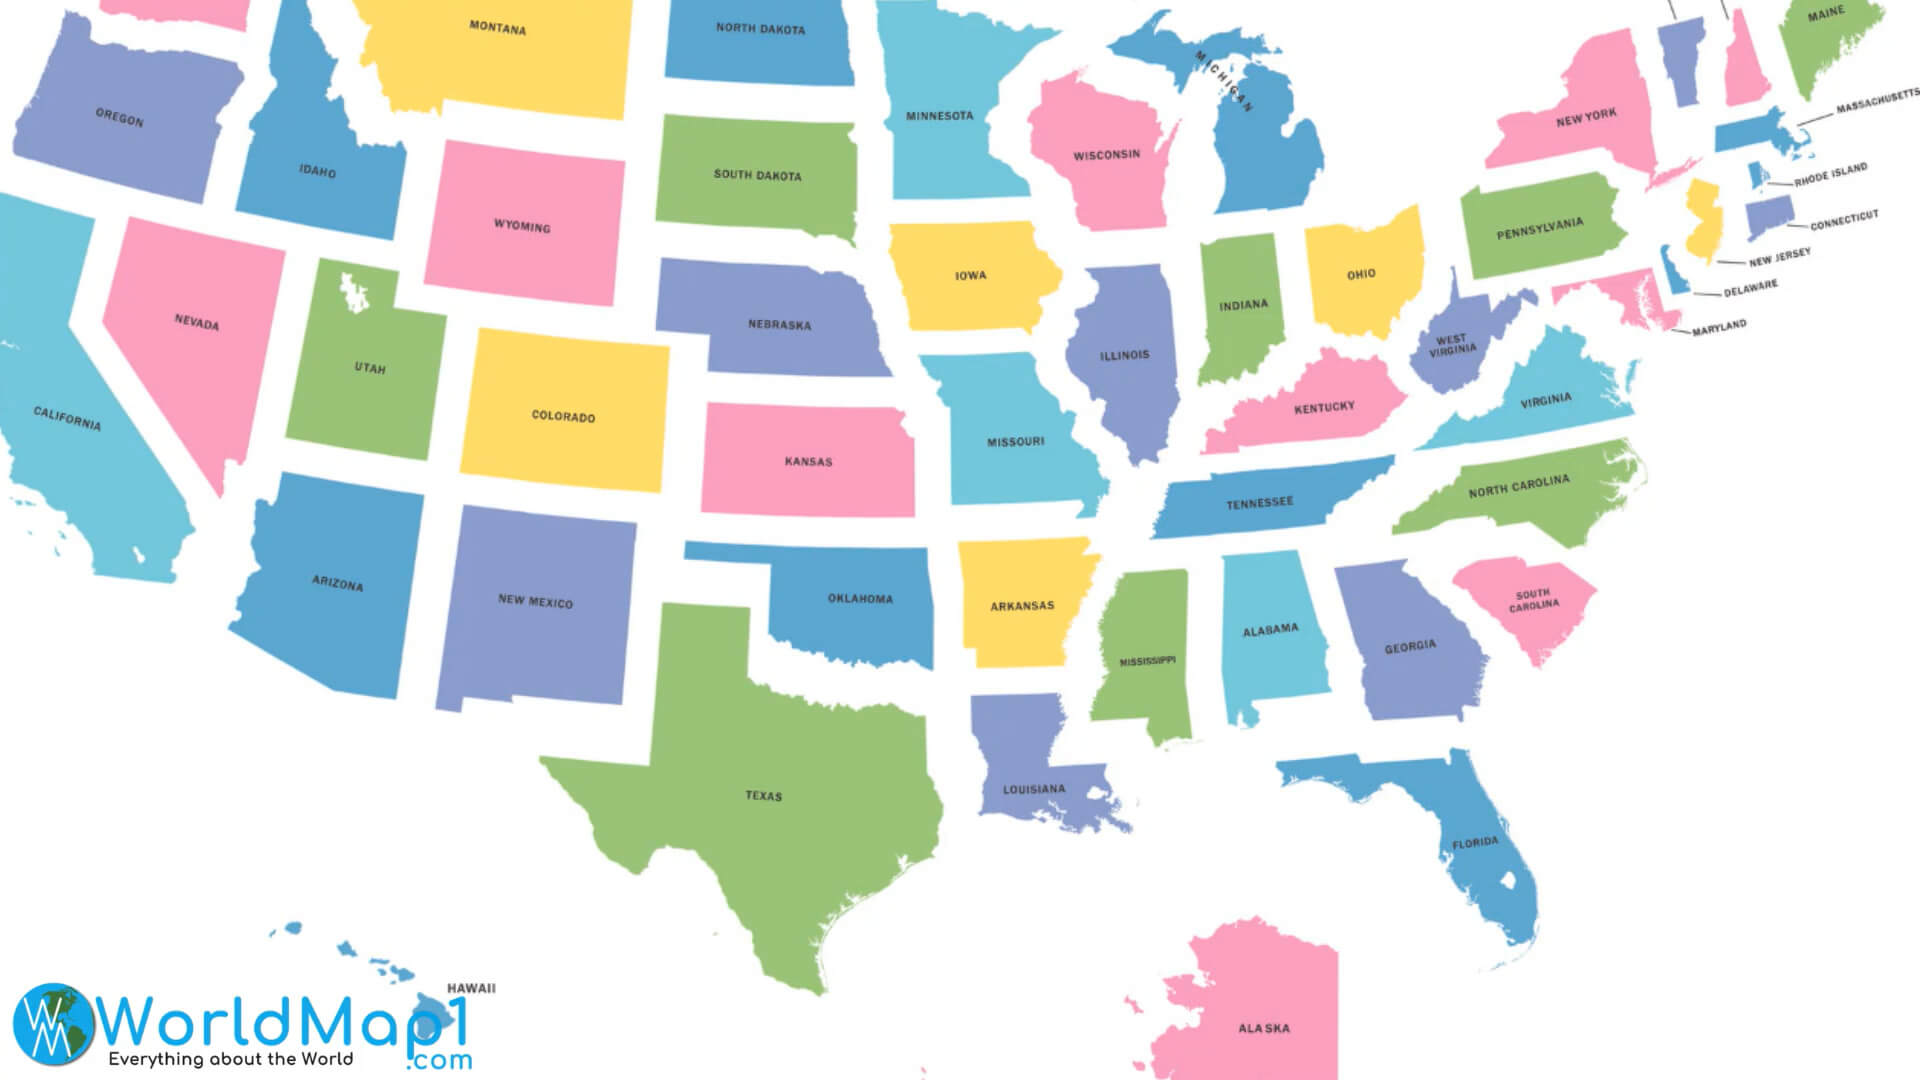 USA States Maps with New York